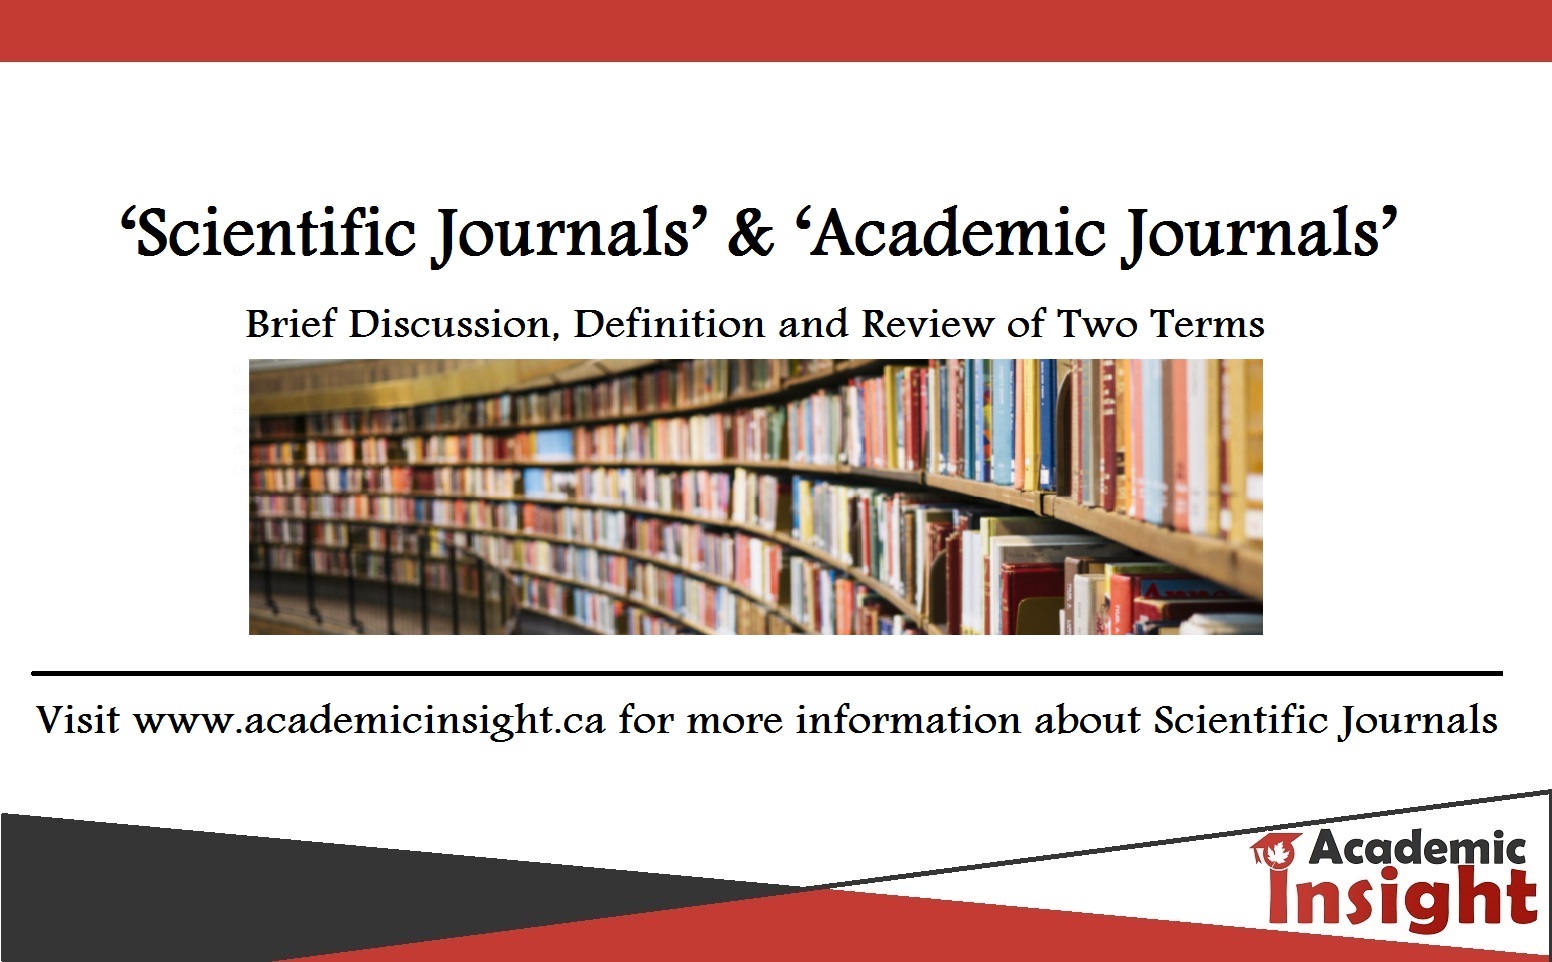 Academic and Scientific Journals: Definition and Review